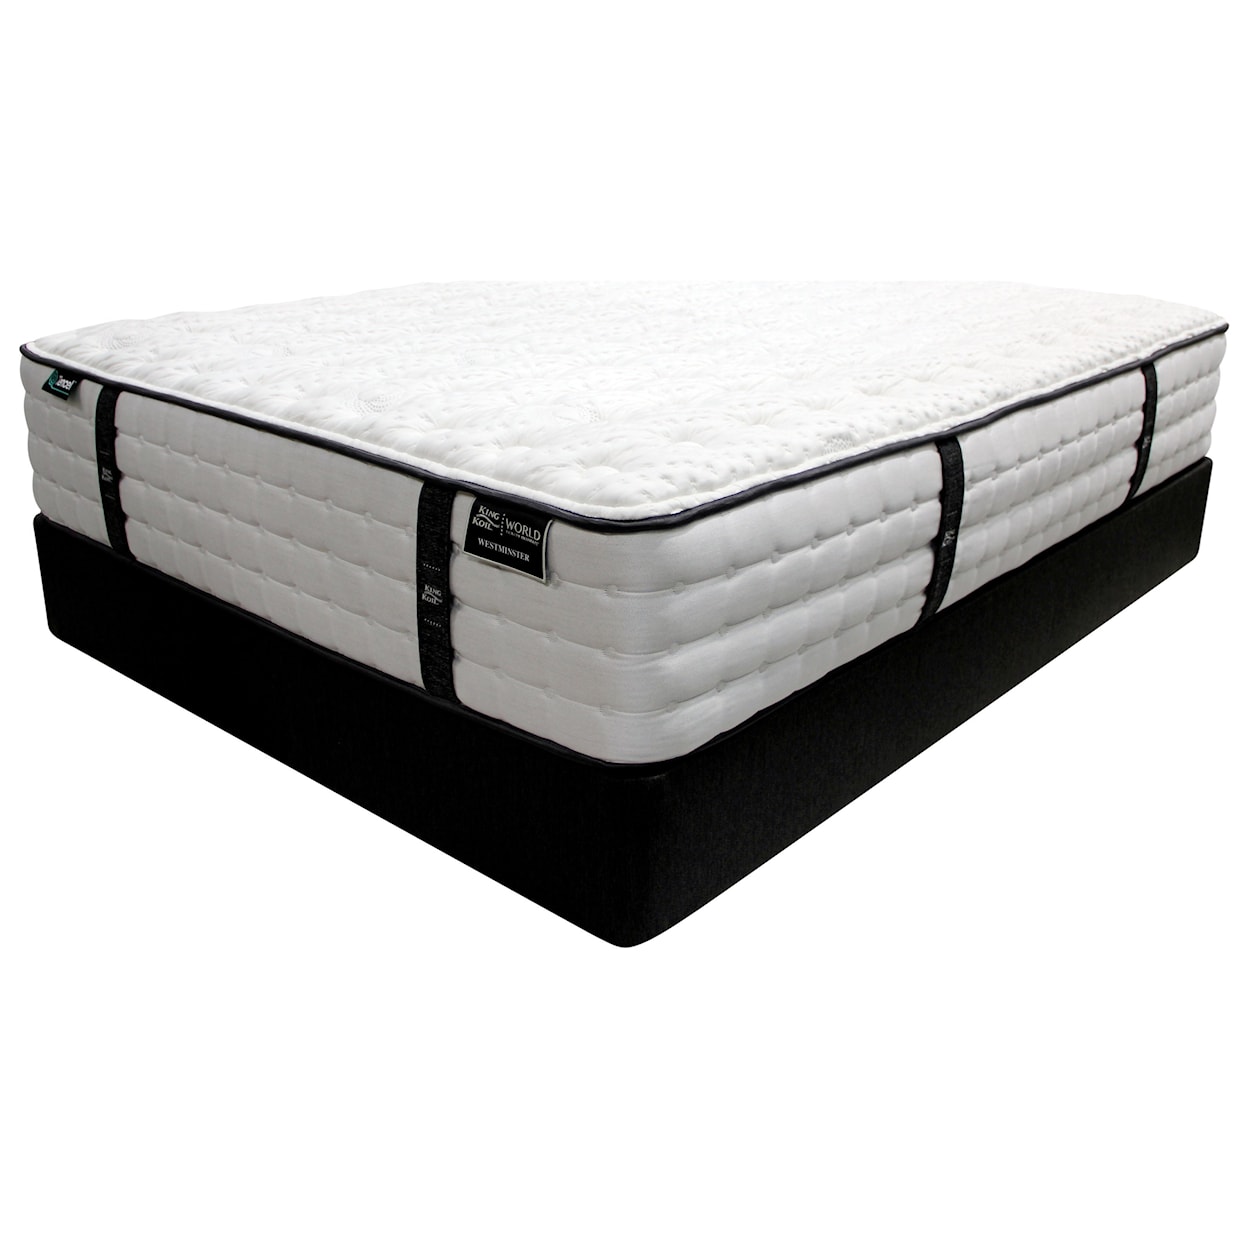 King Koil Westminster F Twin XL Pocketed Coil Mattress Set